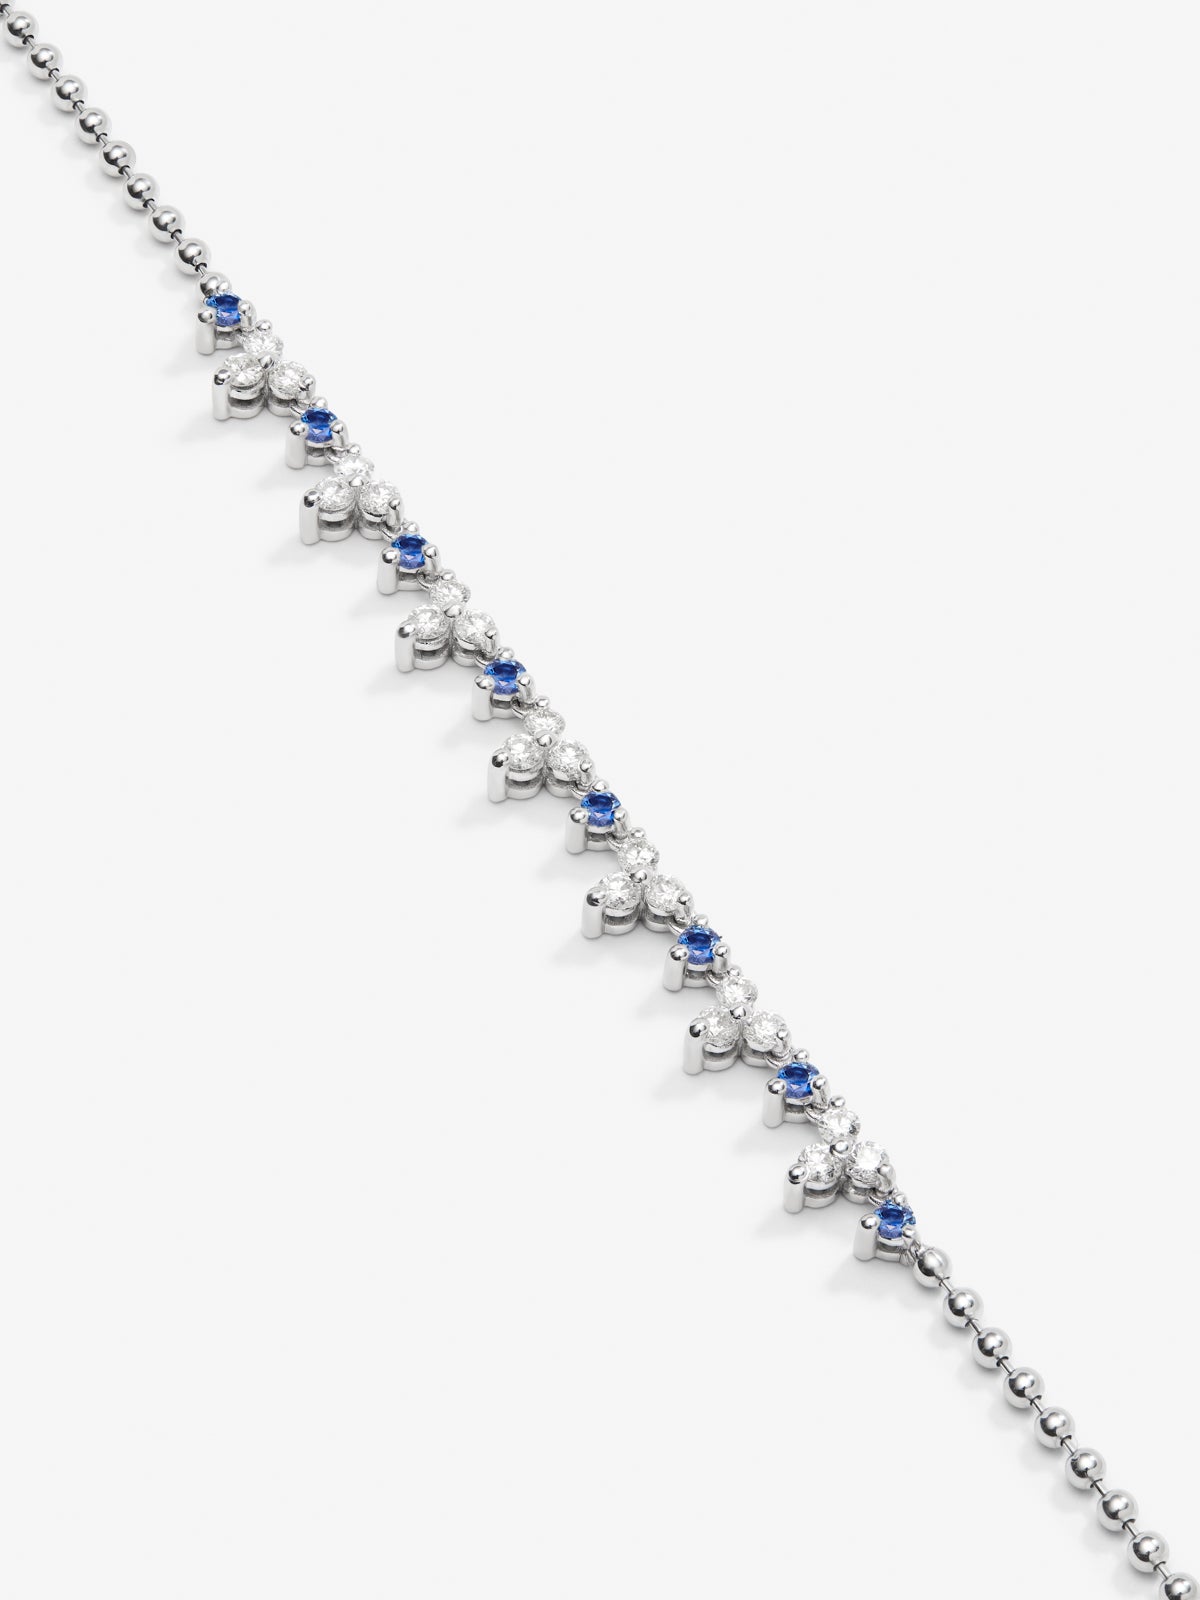 18K white gold pendant with blue zafiros in bright size 1.35 cts and white diamonds of 1.25 cts